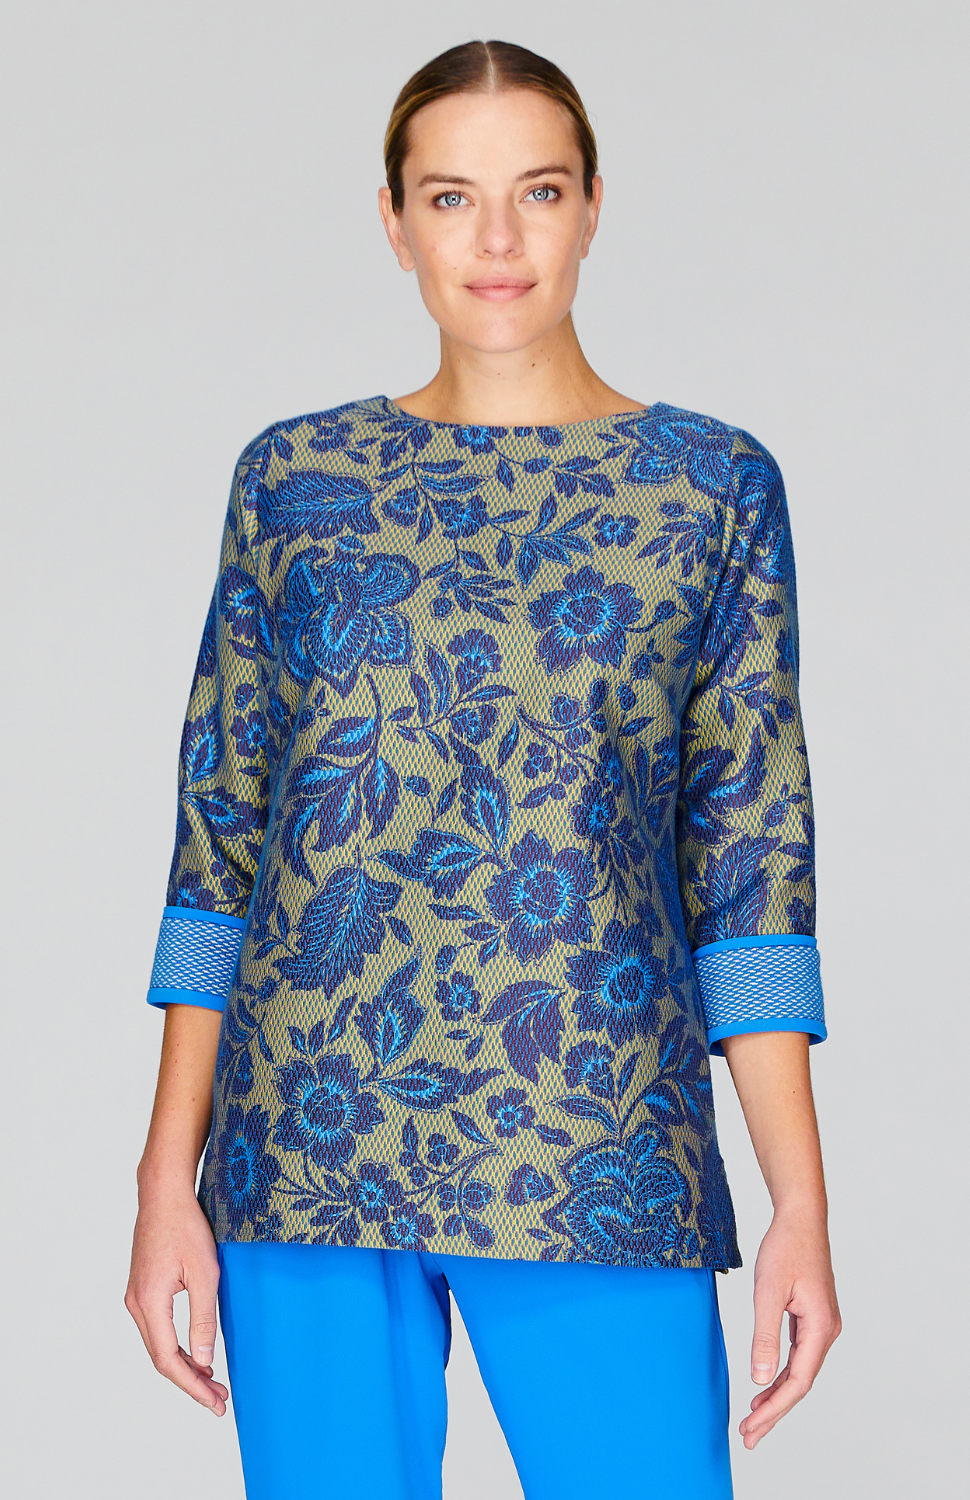 Mosaic Floral 3/4 Sleeve Blouse with Bias Trim